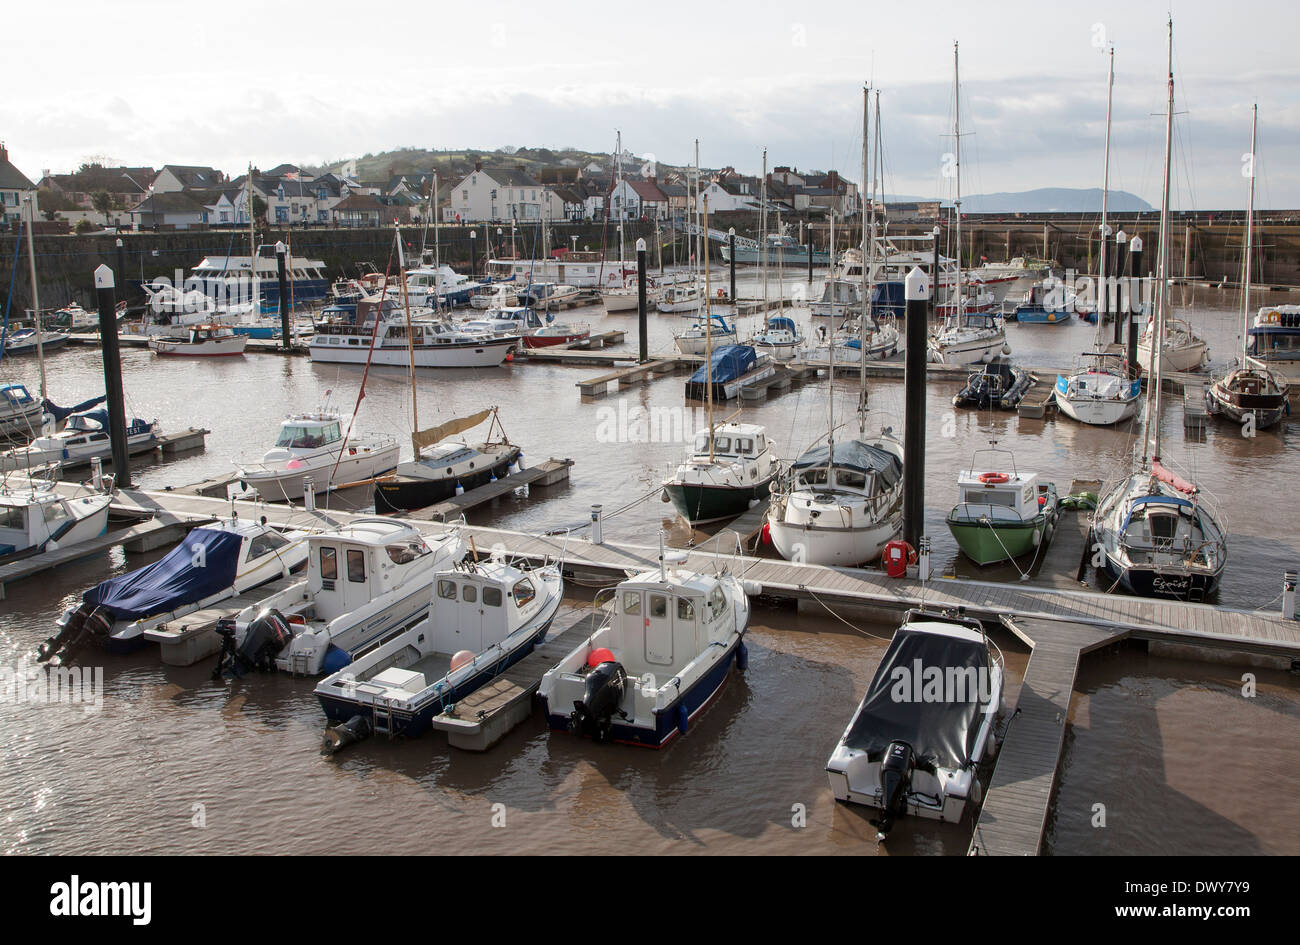 Boats in the harbour at Watchet, Somerset, England Stock Photo